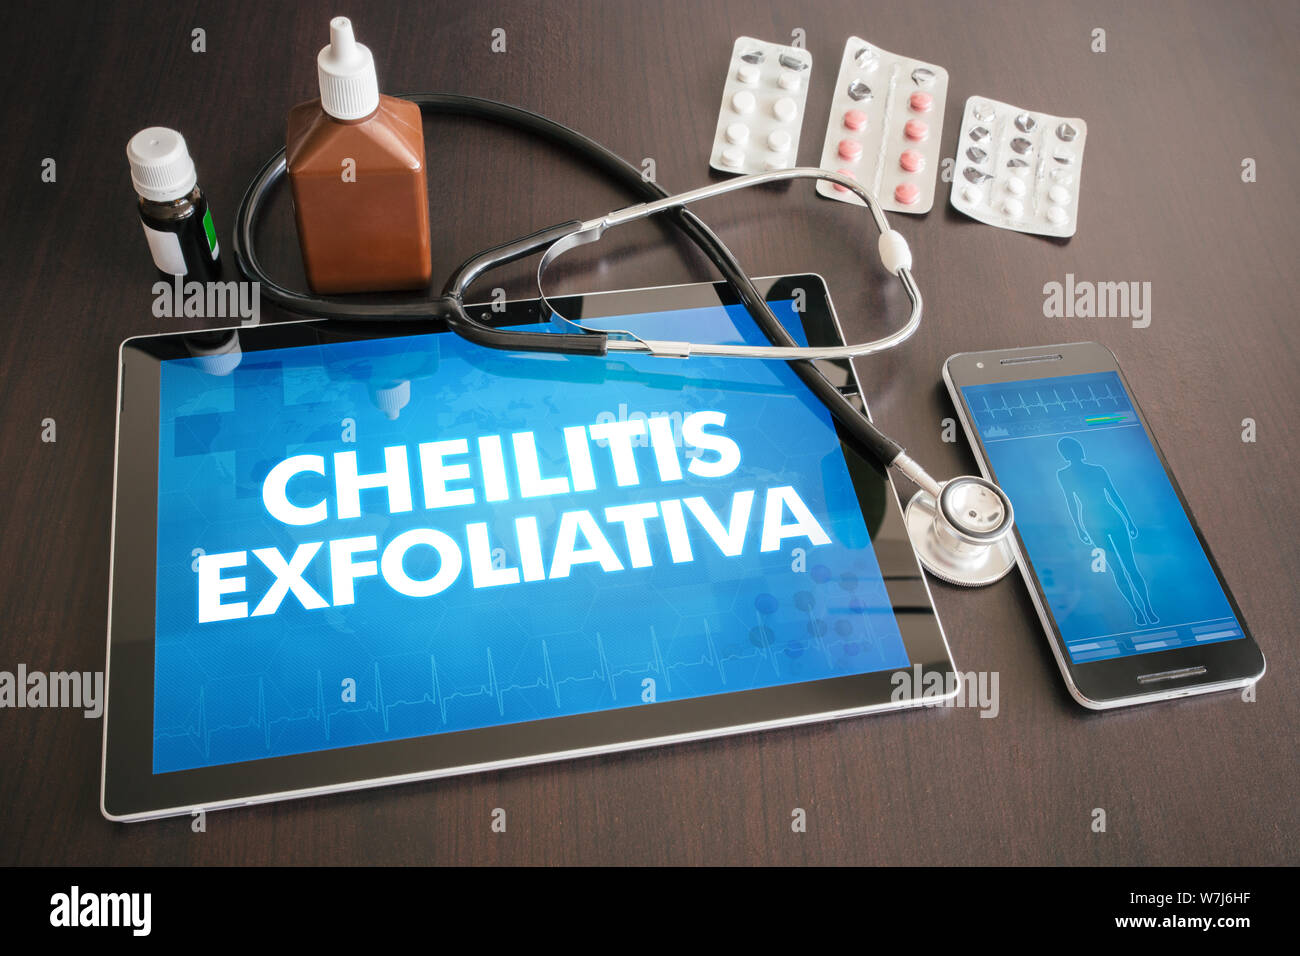 Cheilitis exfoliativa (cutaneous disease) diagnosis medical concept on tablet screen with stethoscope. Stock Photo